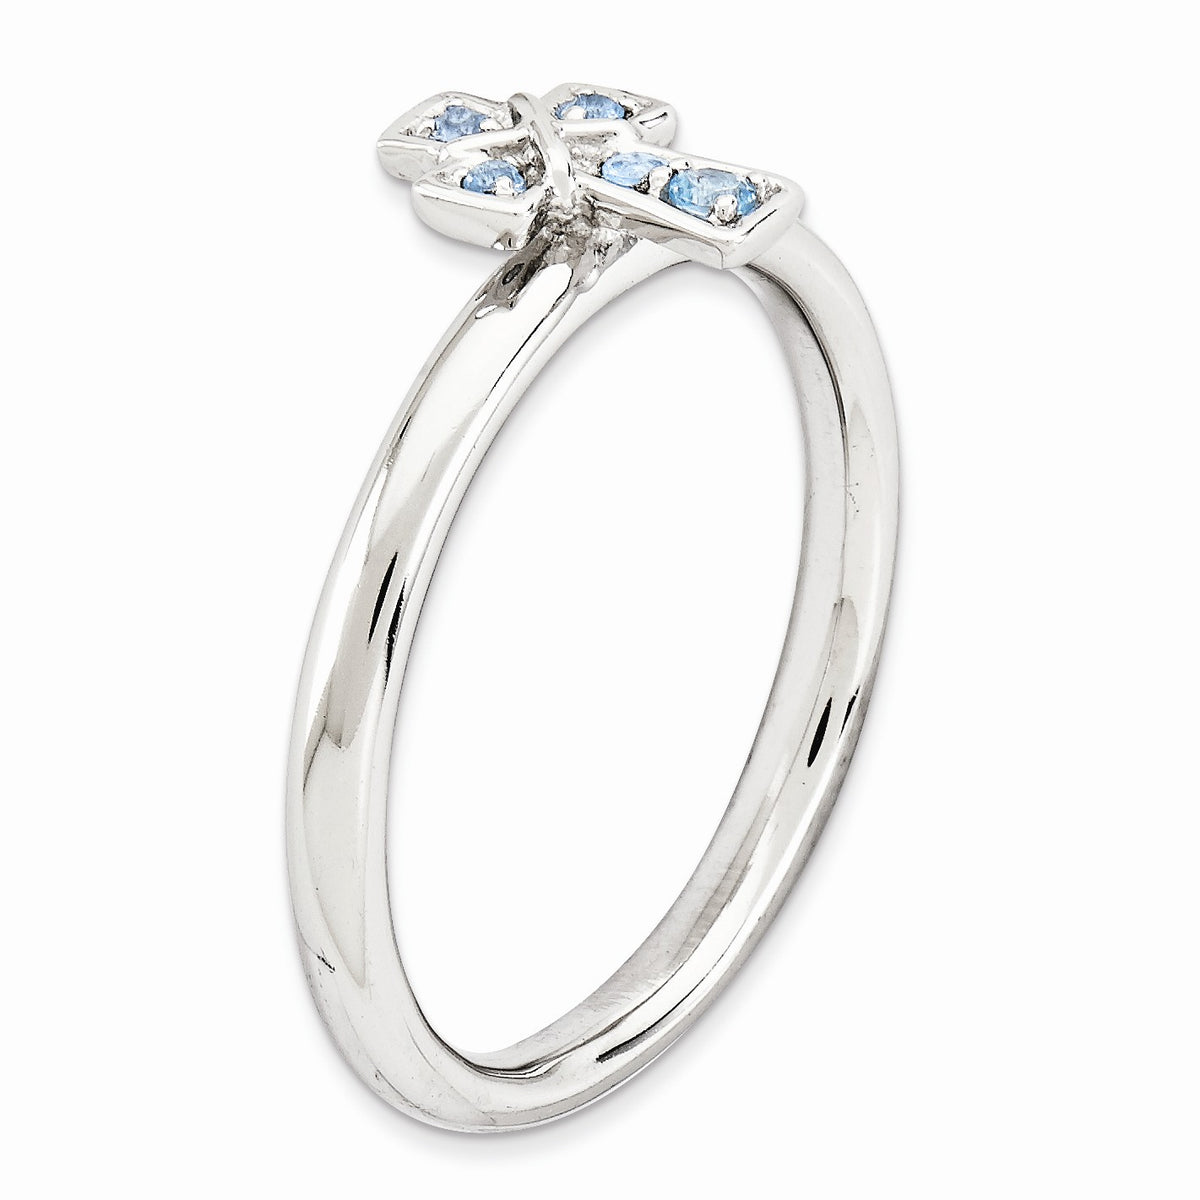 Alternate view of the Rhodium Plated Sterling Silver Stackable Blue Topaz 9mm Cross Ring by The Black Bow Jewelry Co.